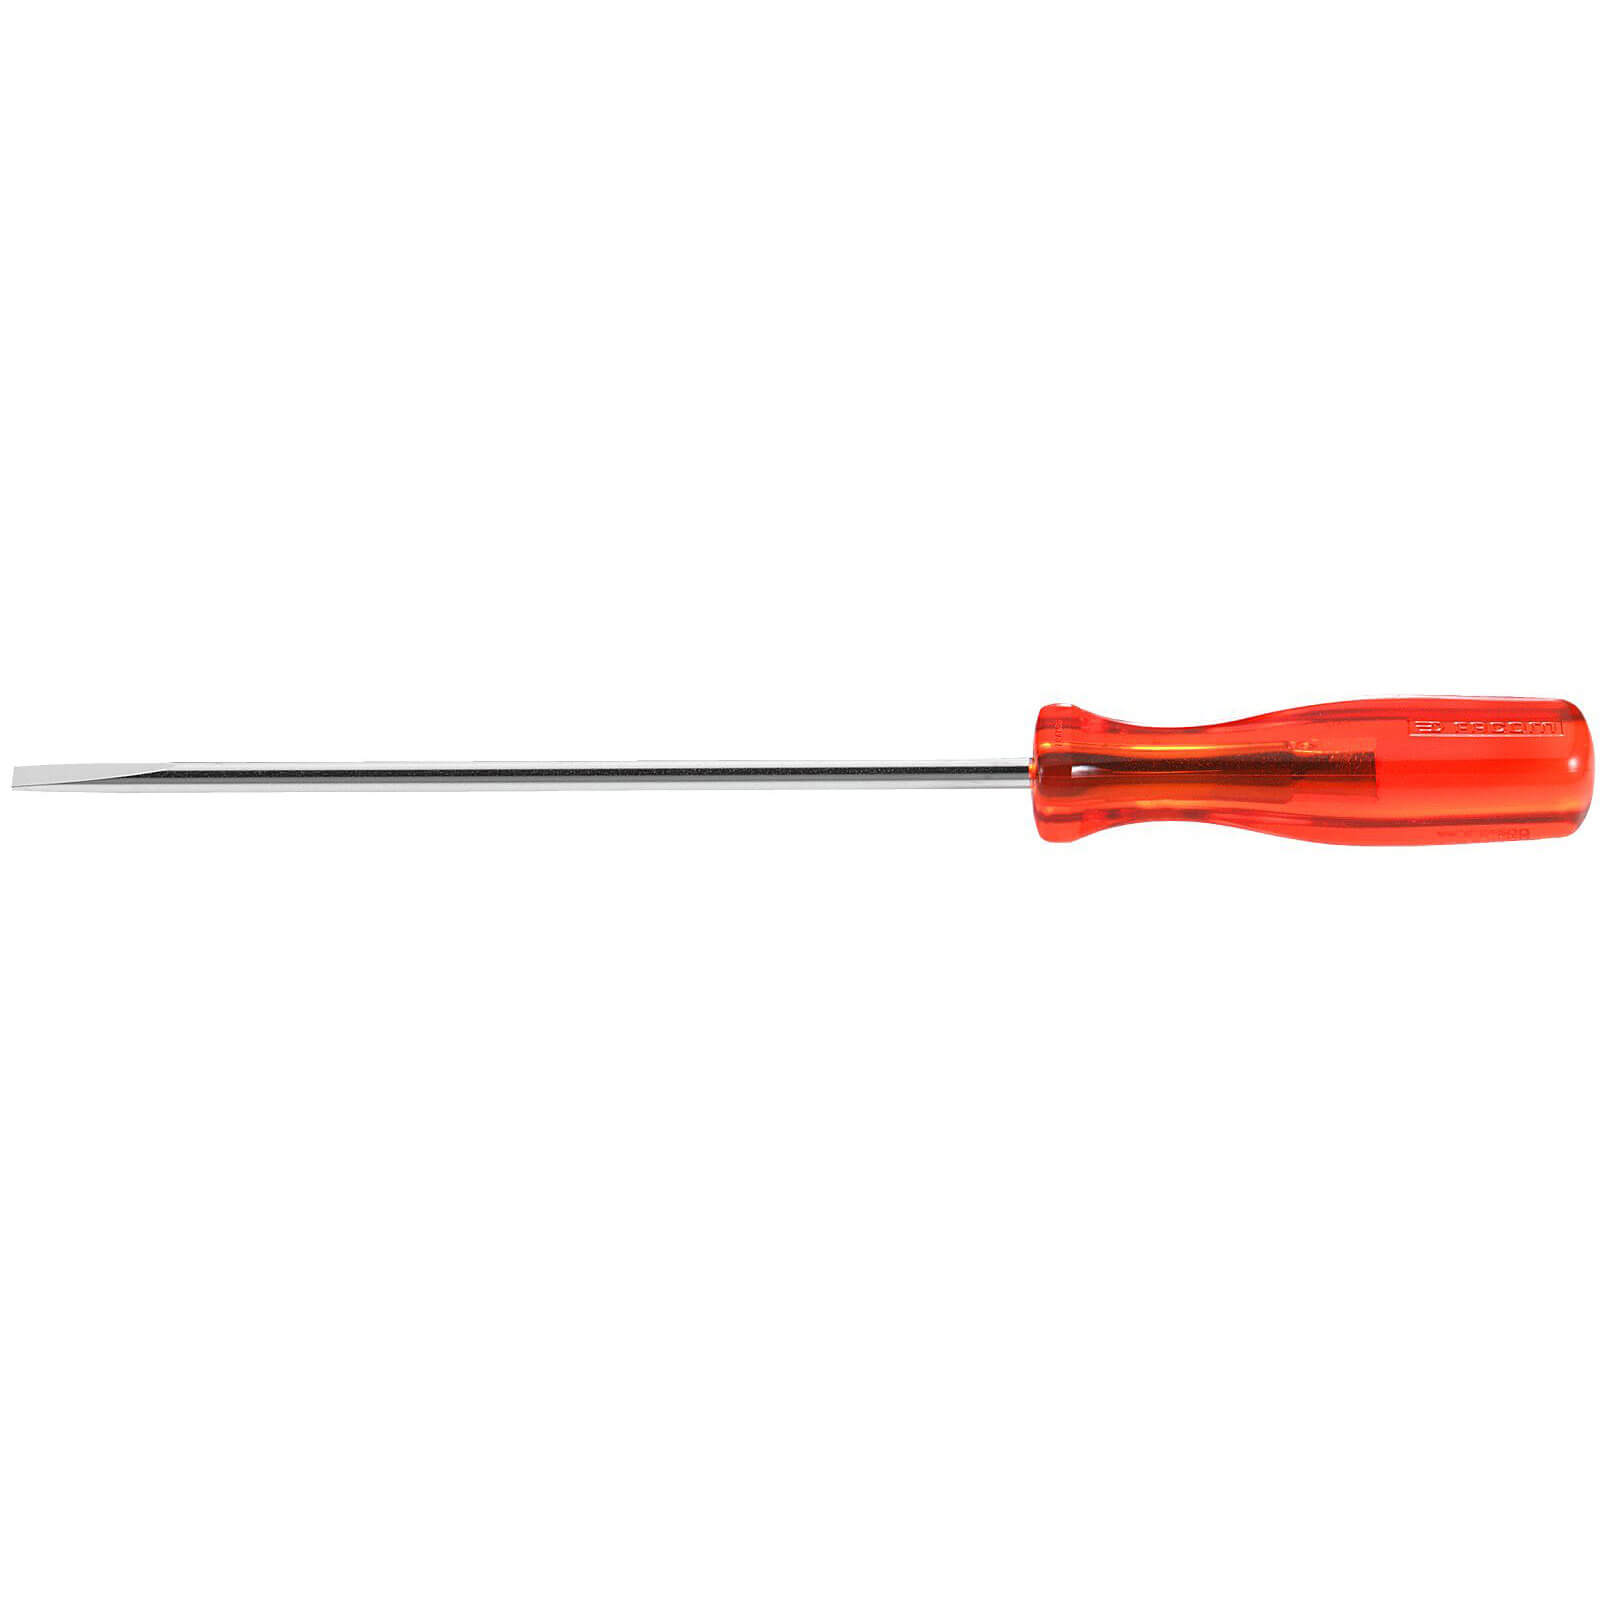 Image of Facom Isoryl Parallel Slotted Screwdriver 5.5mm 200mm